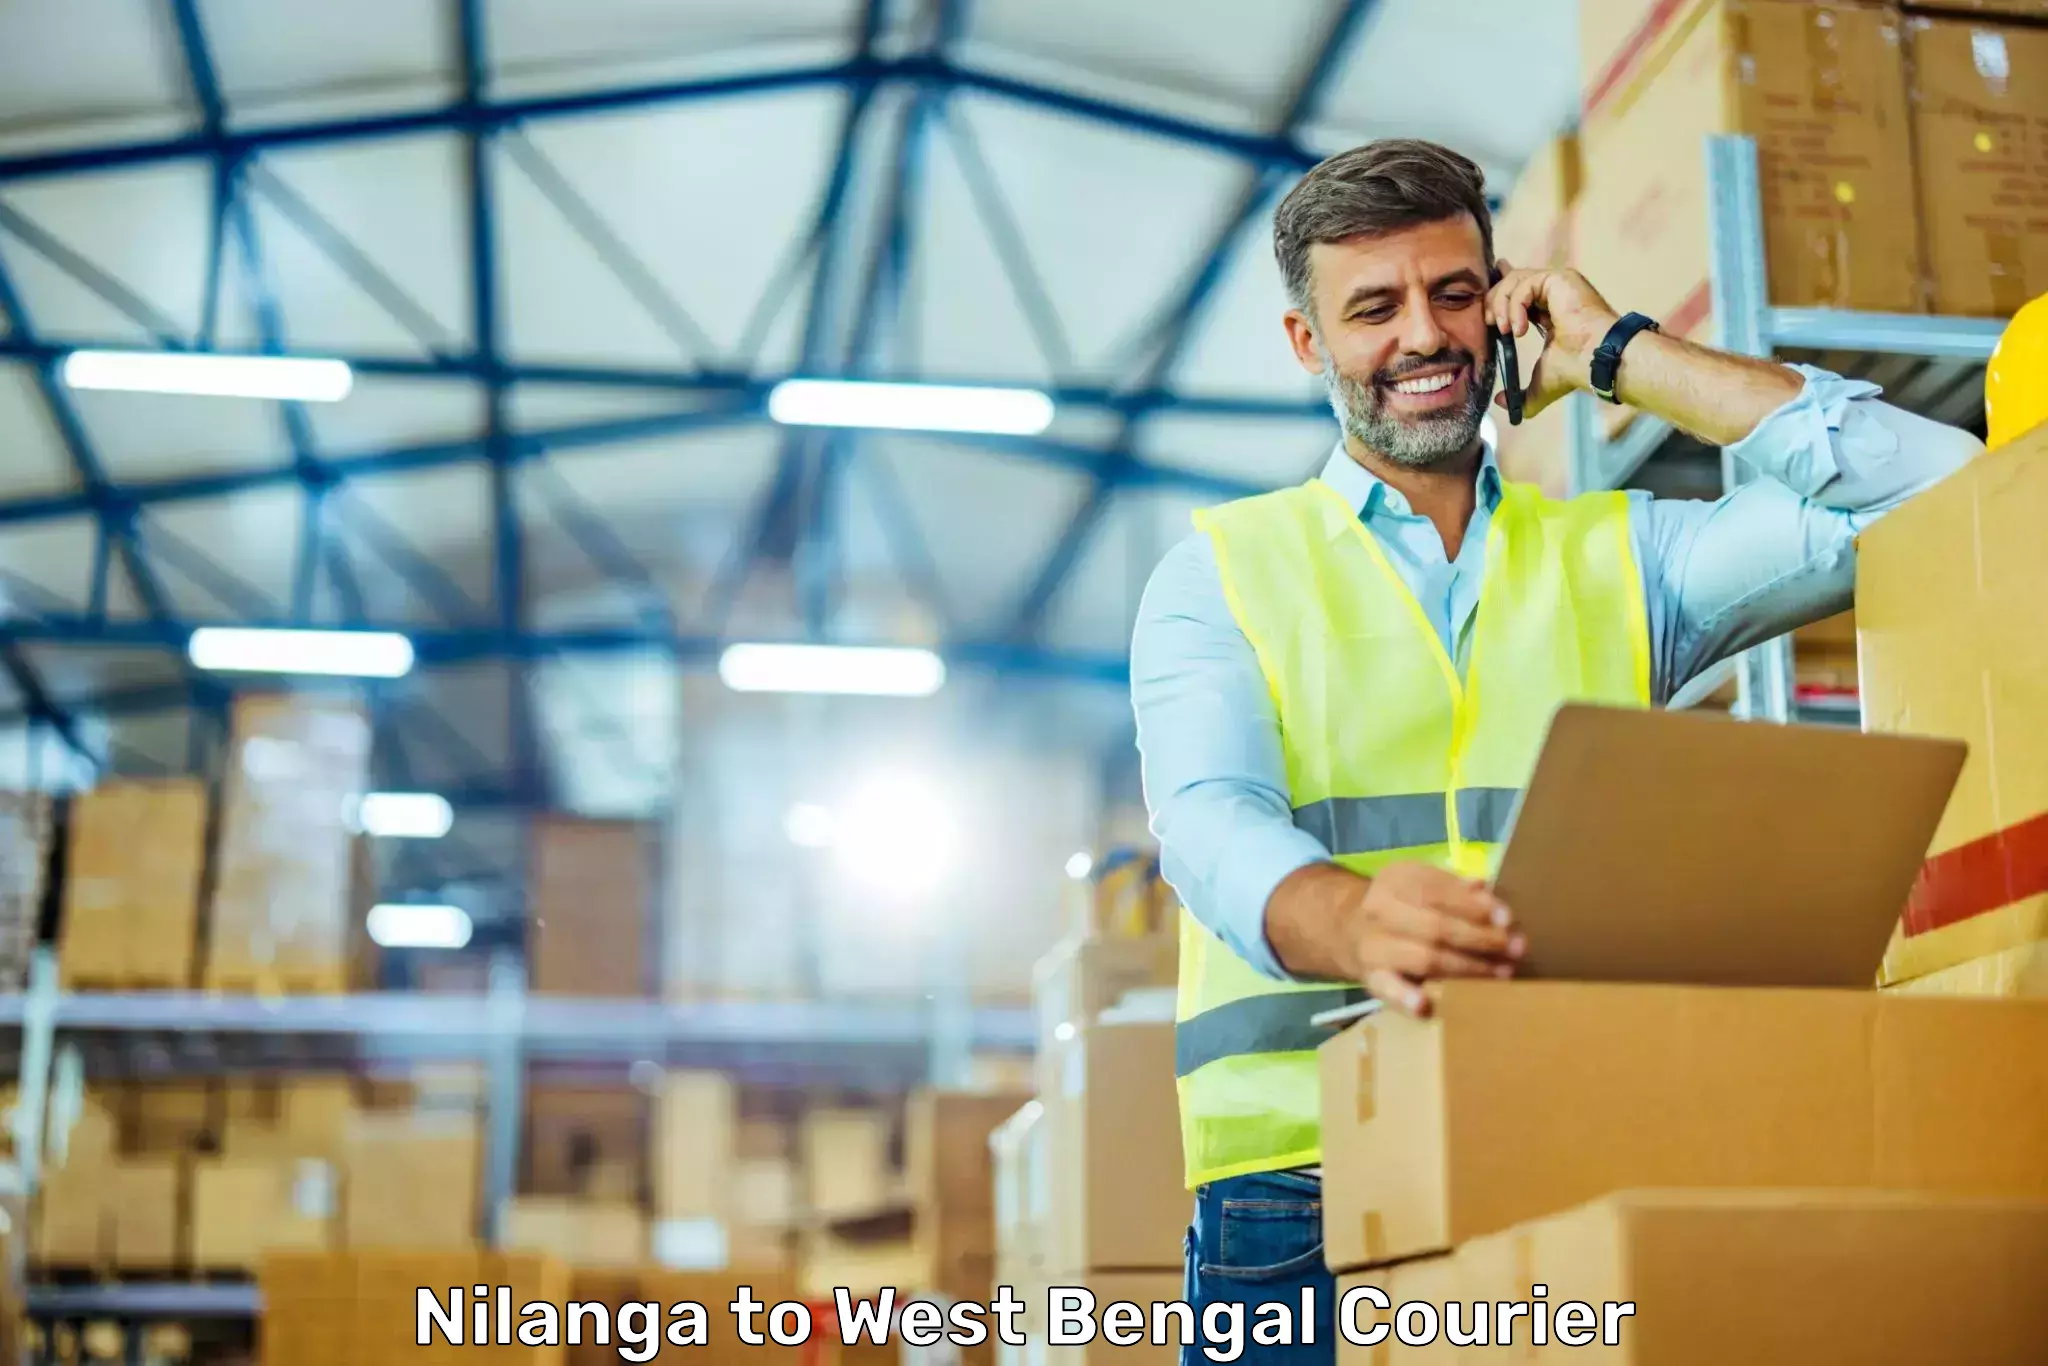 Express delivery network Nilanga to West Bengal